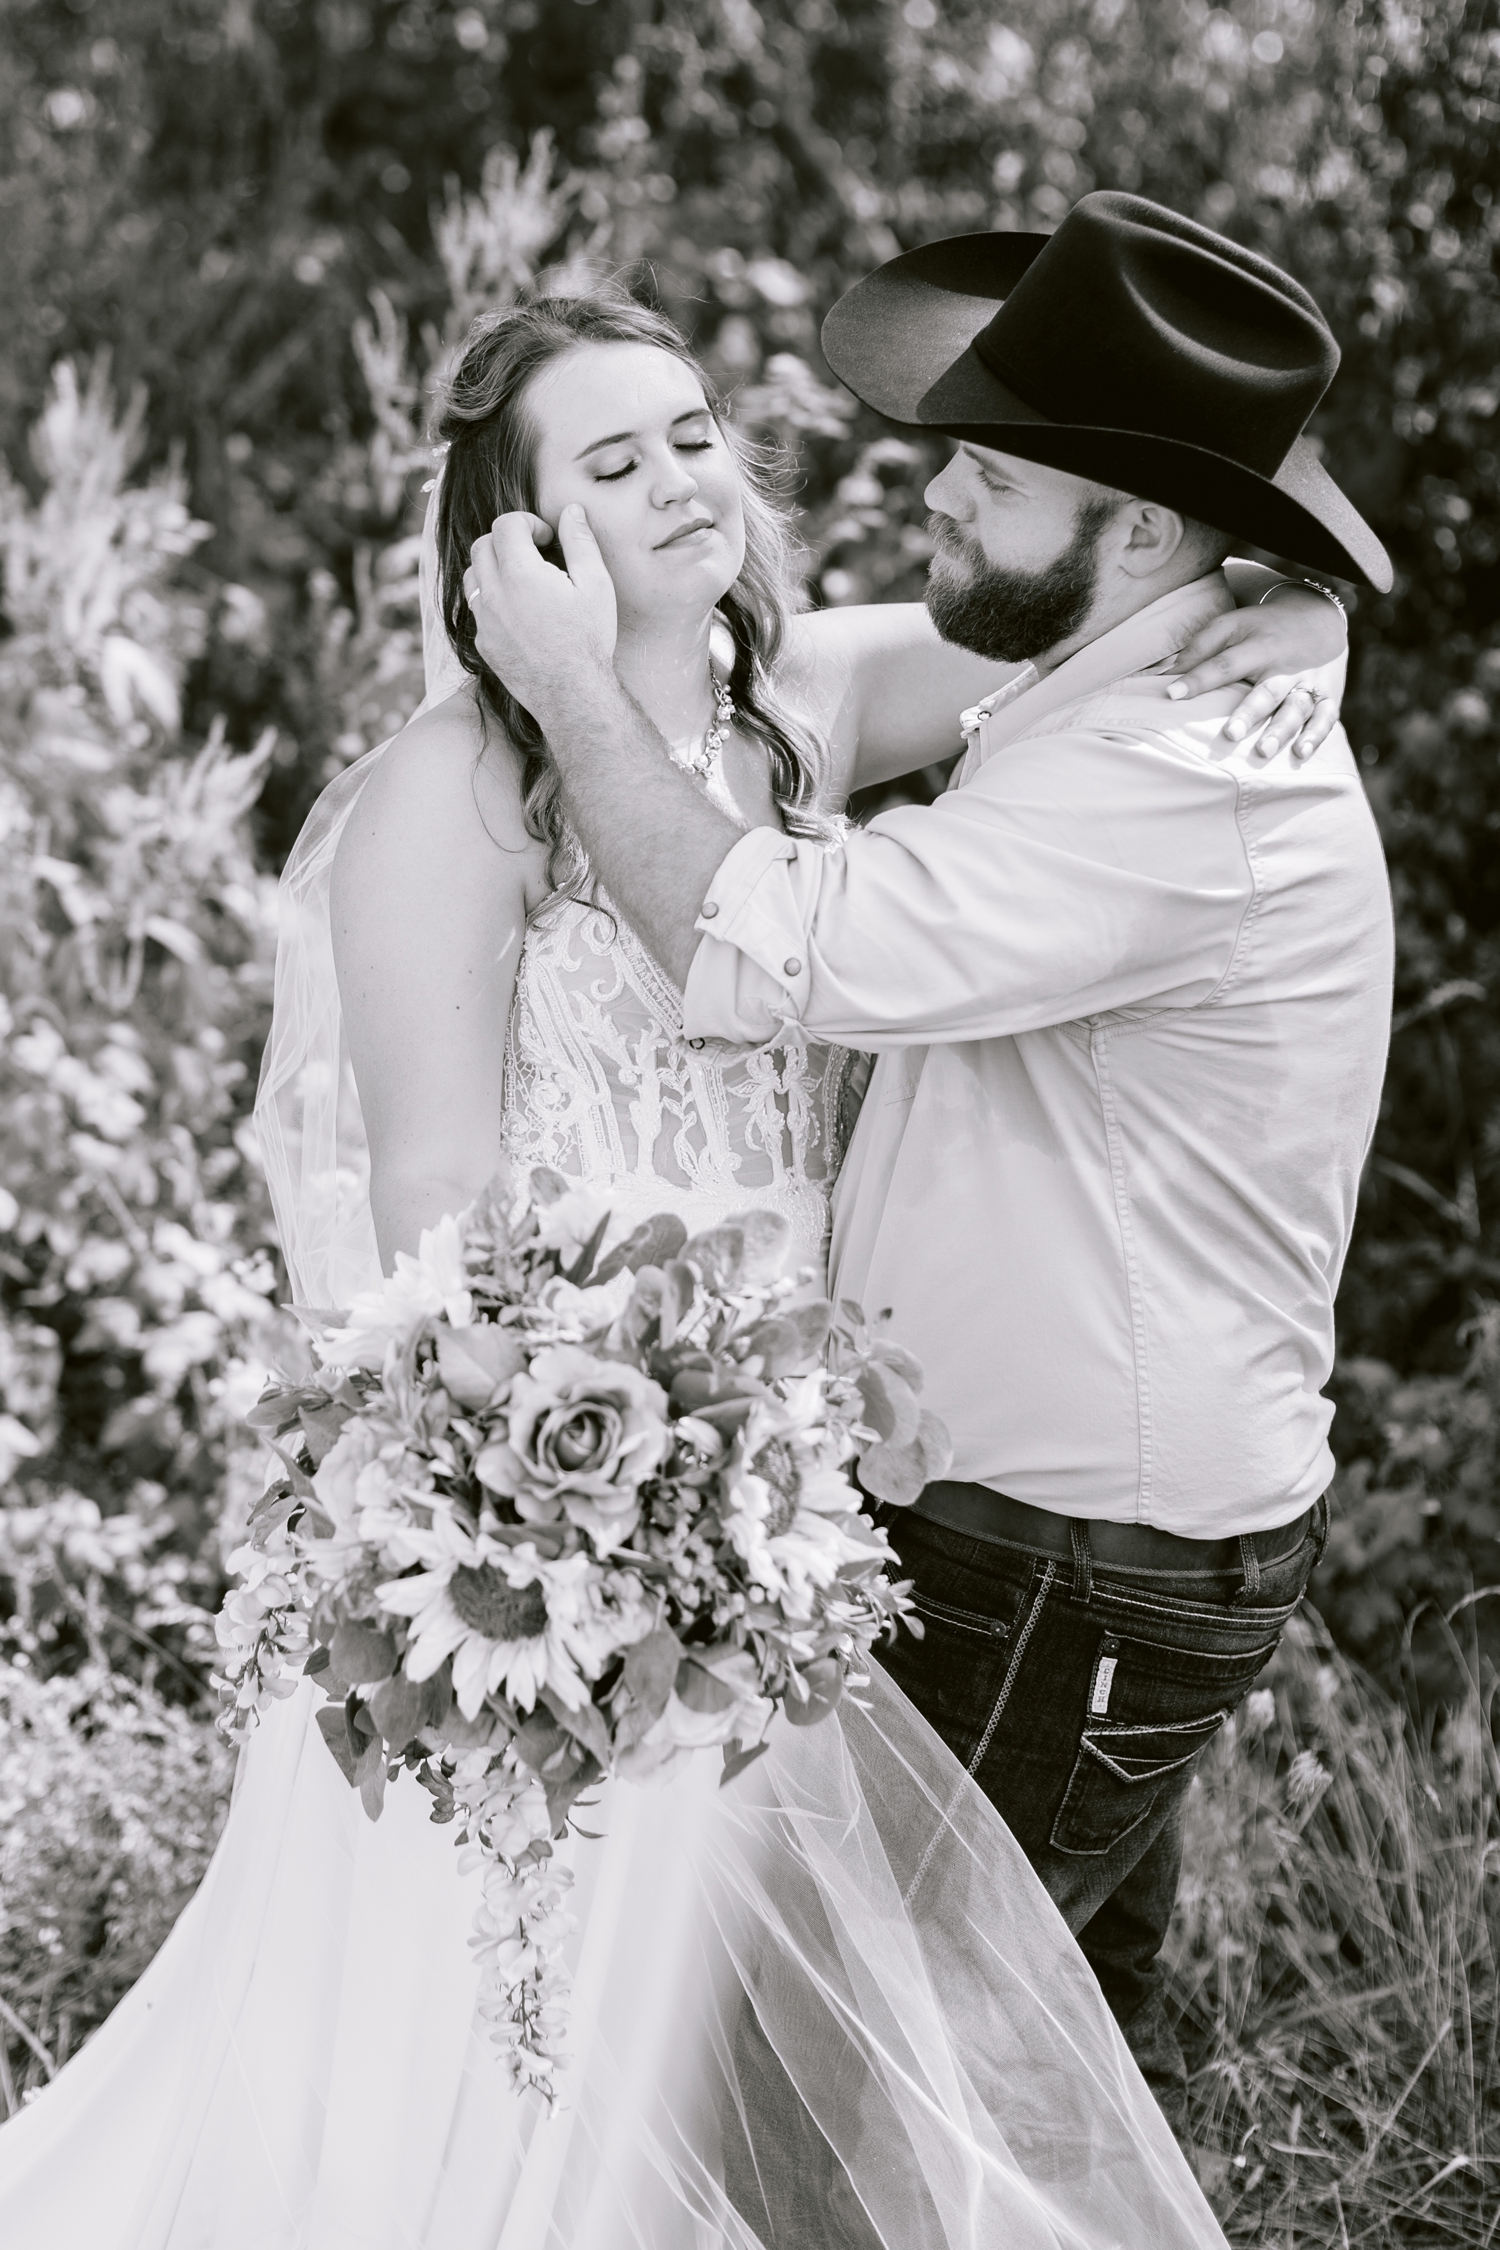 Matt gently brushes a stray hair off of his bride's, Megan, cheek | A rustic, country wedding with western touches | CB Studio